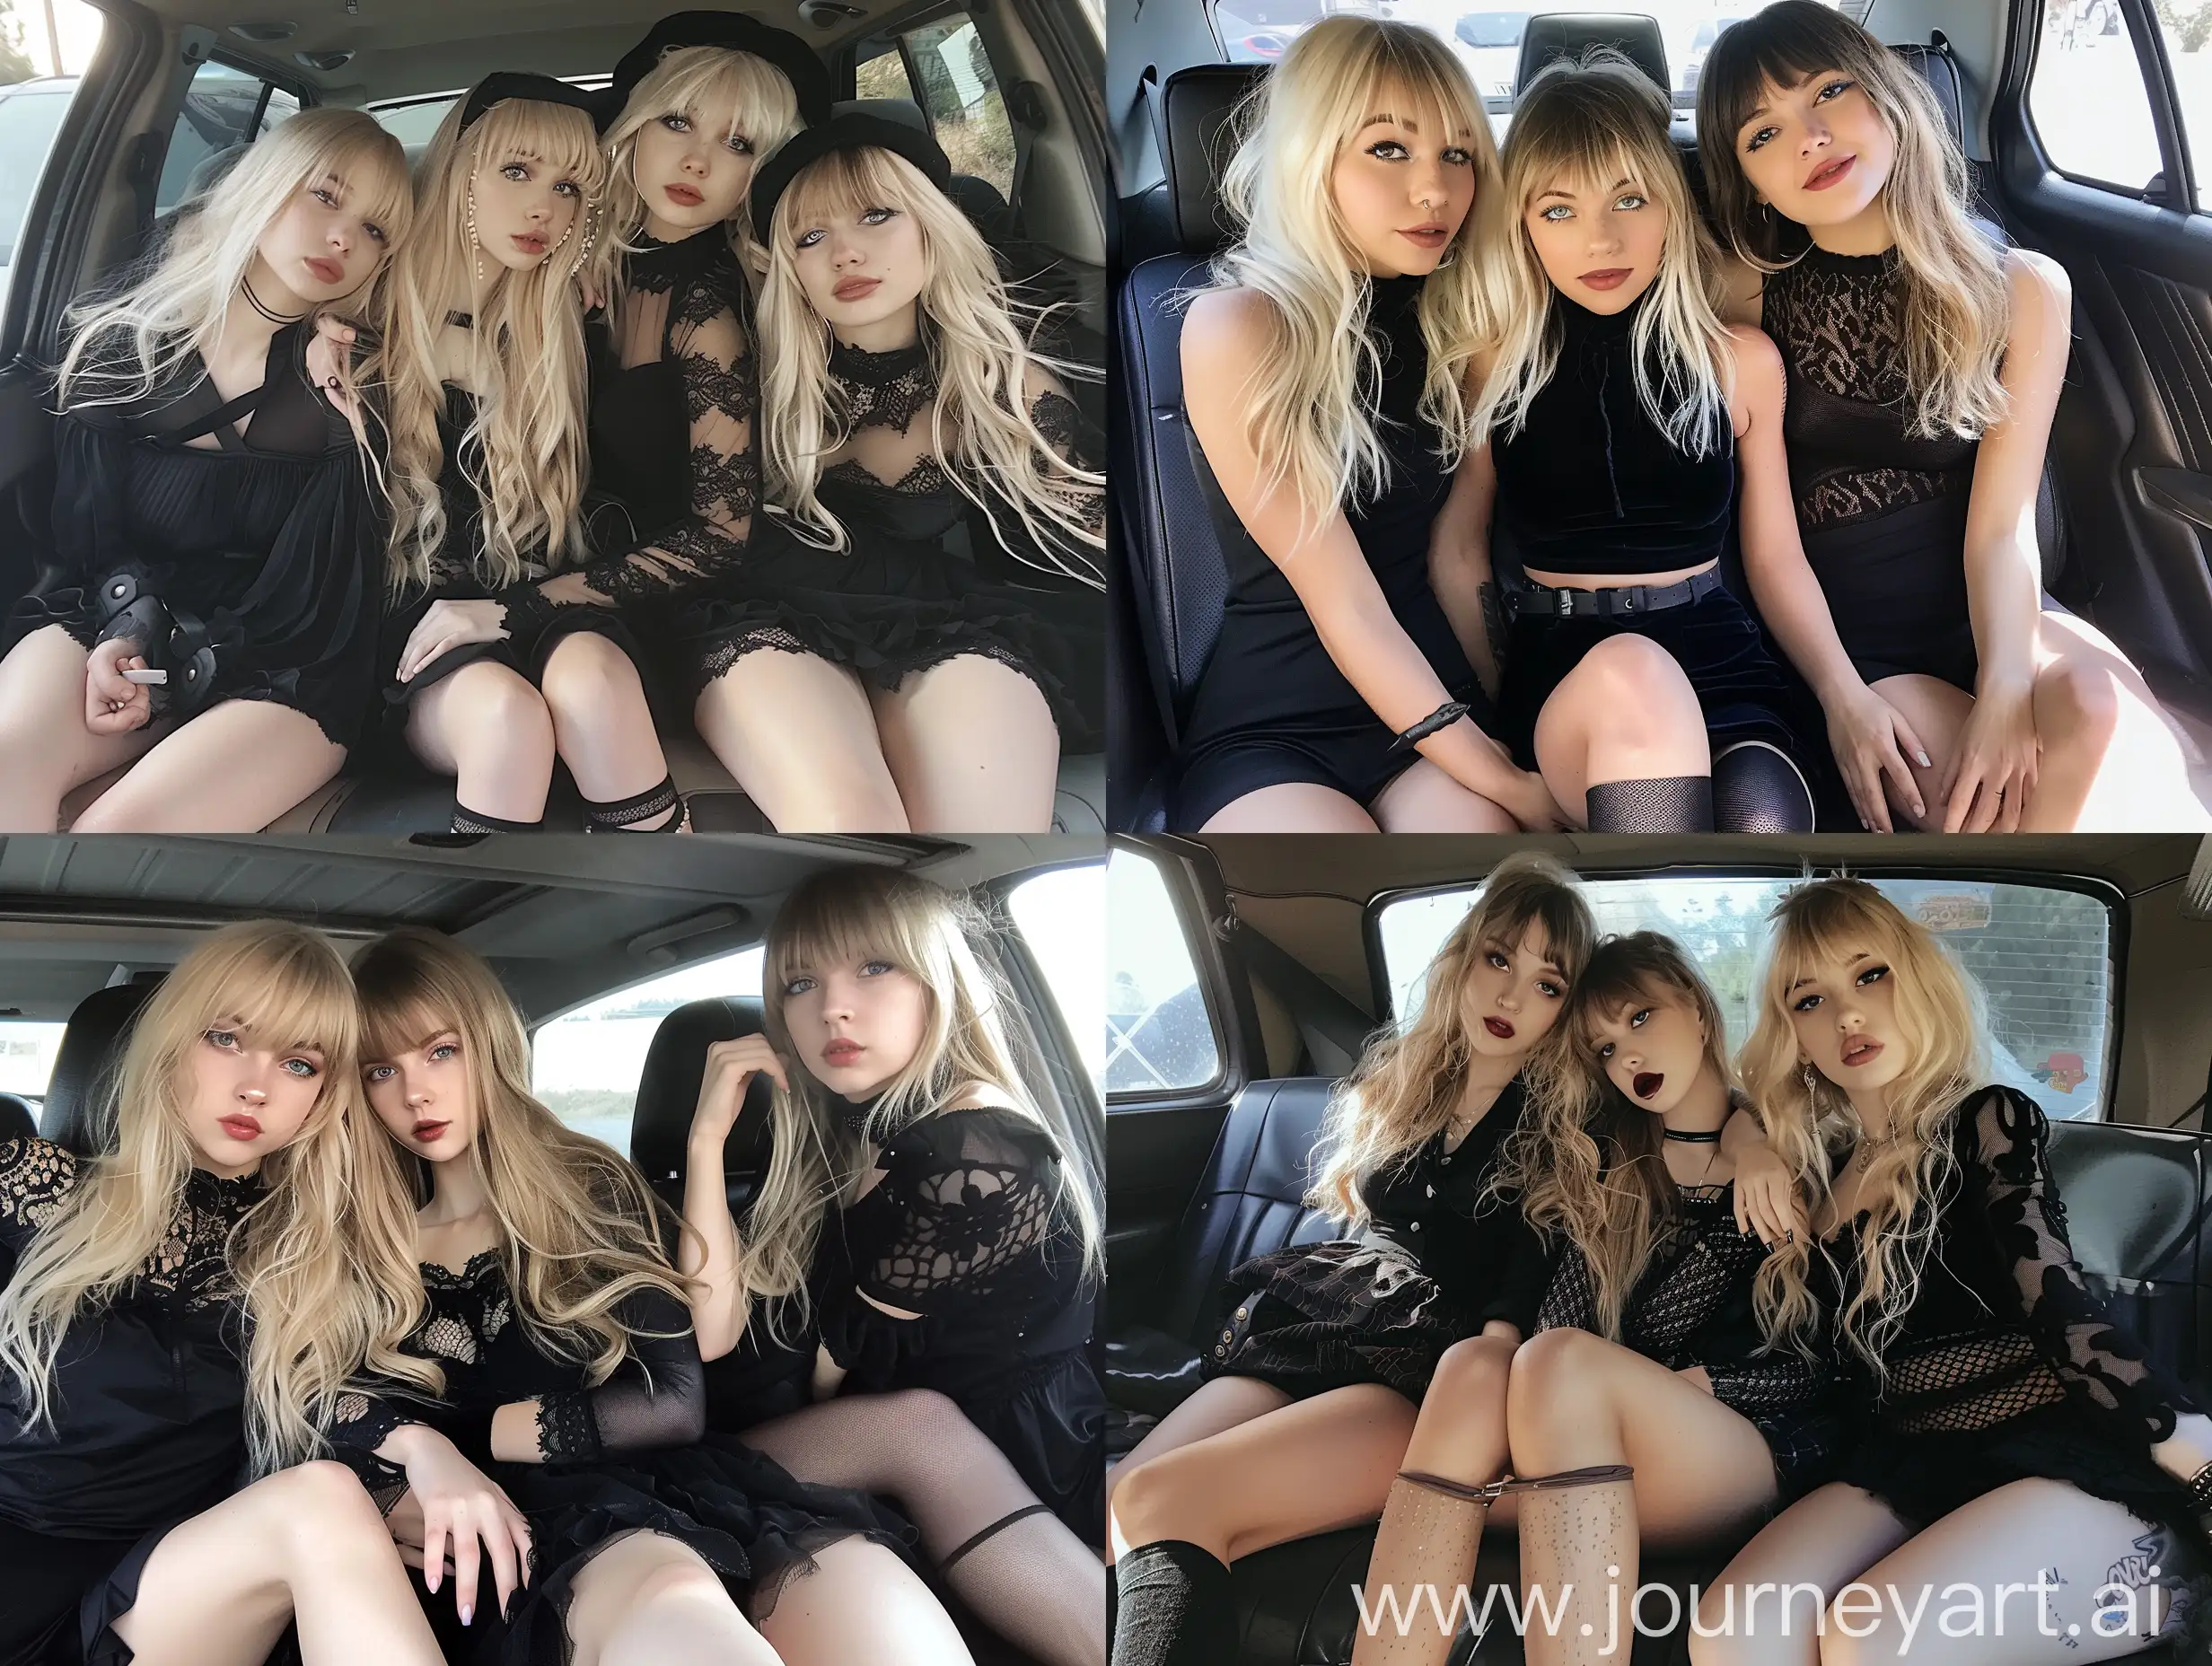 Three-Young-Women-Taking-Natural-Selfie-in-Black-Dresses-Inside-Car